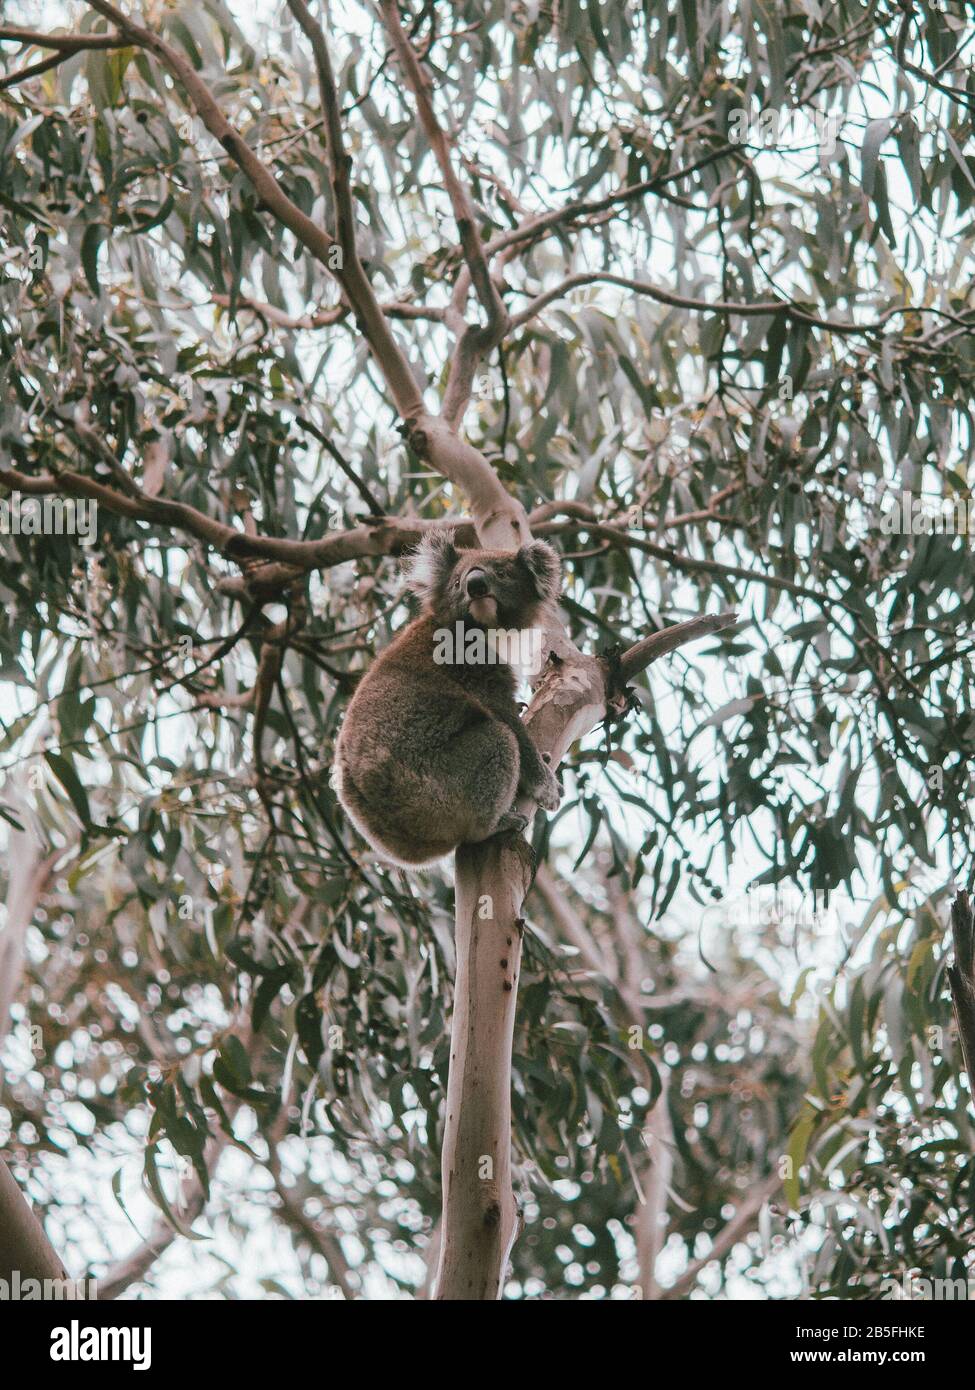 A koala high in the treetops, hugging the trunk of the tree in Australia Stock Photo